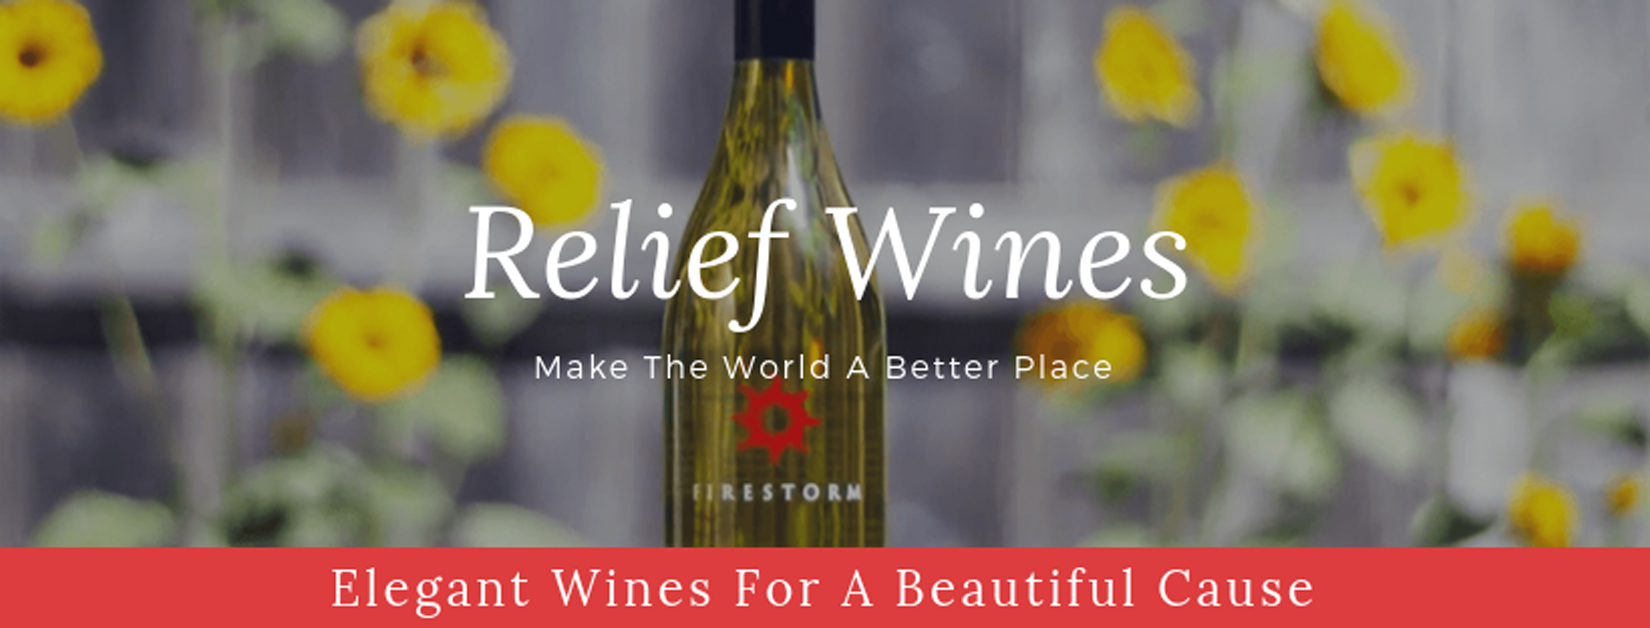 Relief Wines wildfire charity